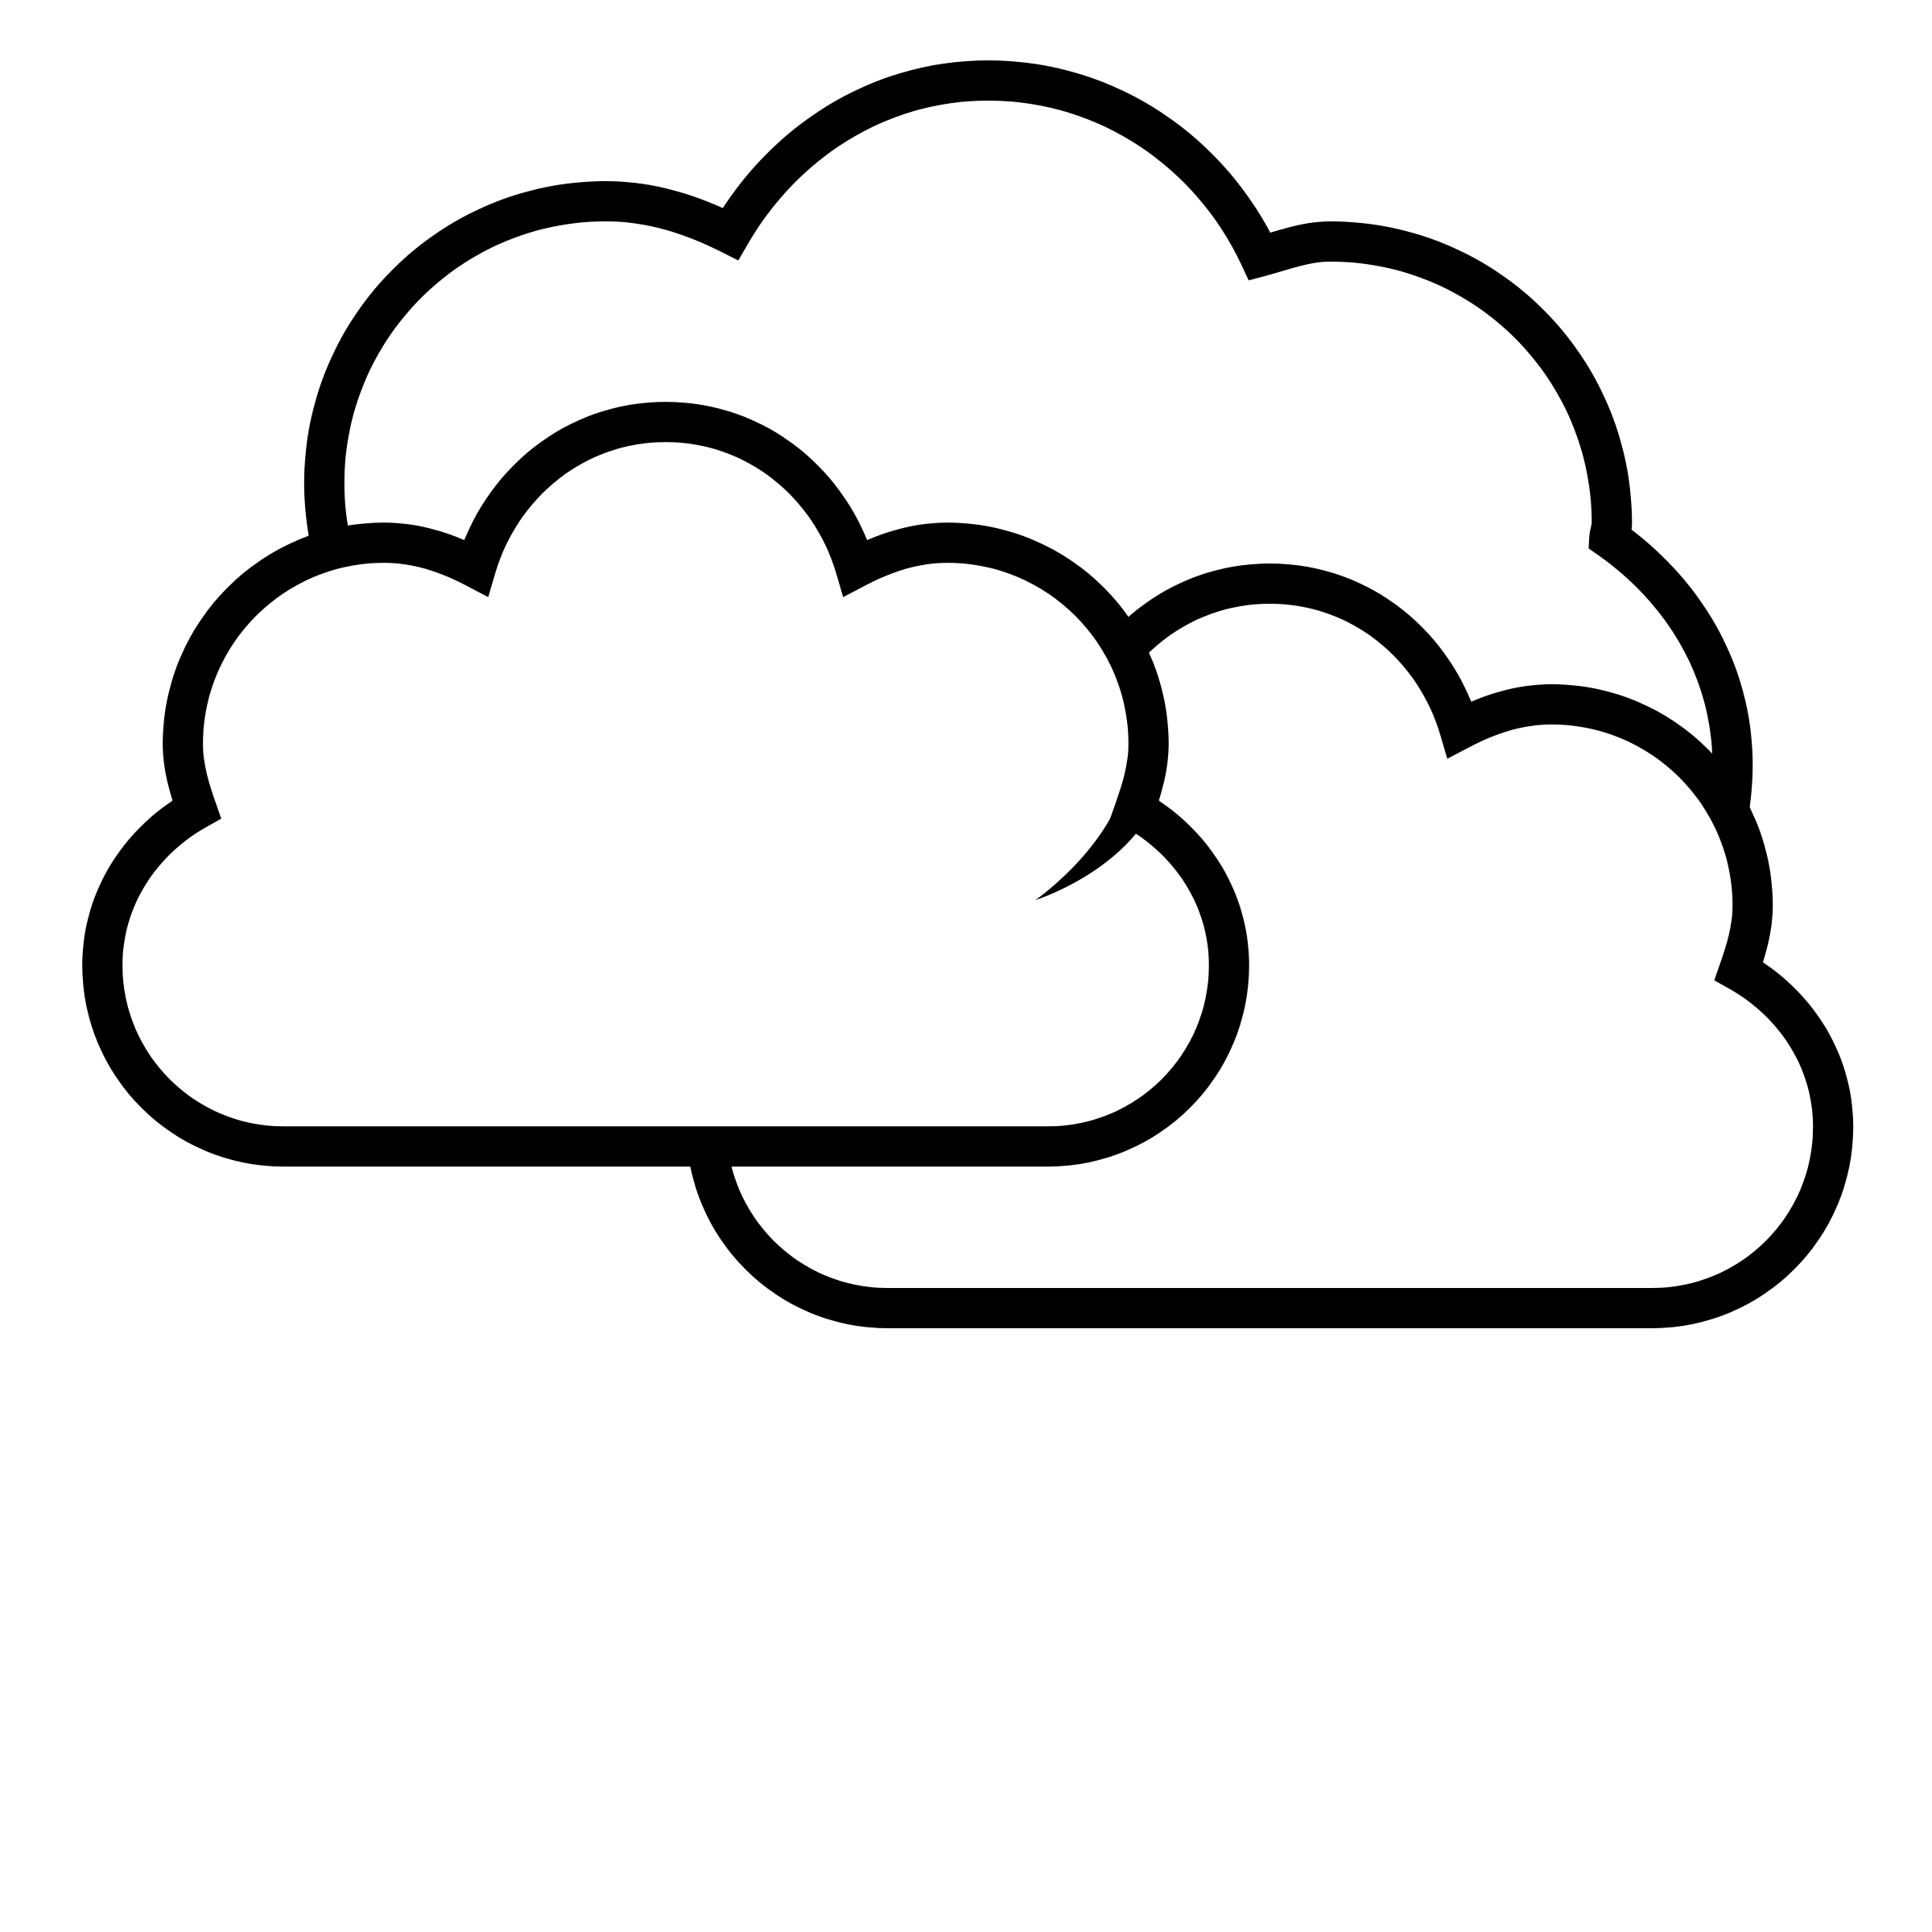 Clouds Black And White Clipart - ClipArt Best